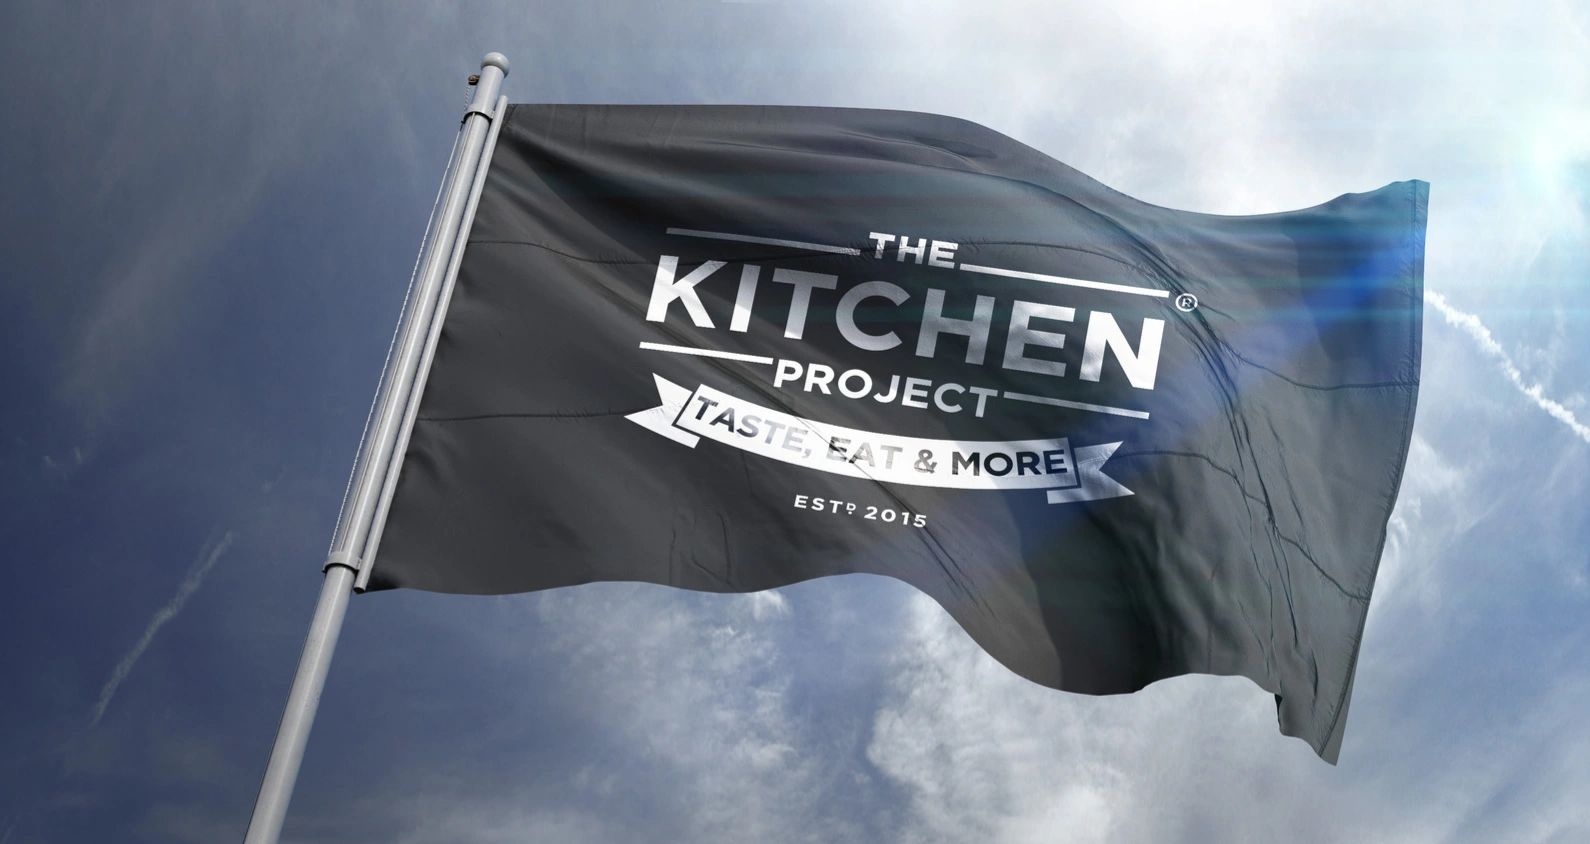 The Kitchen Project